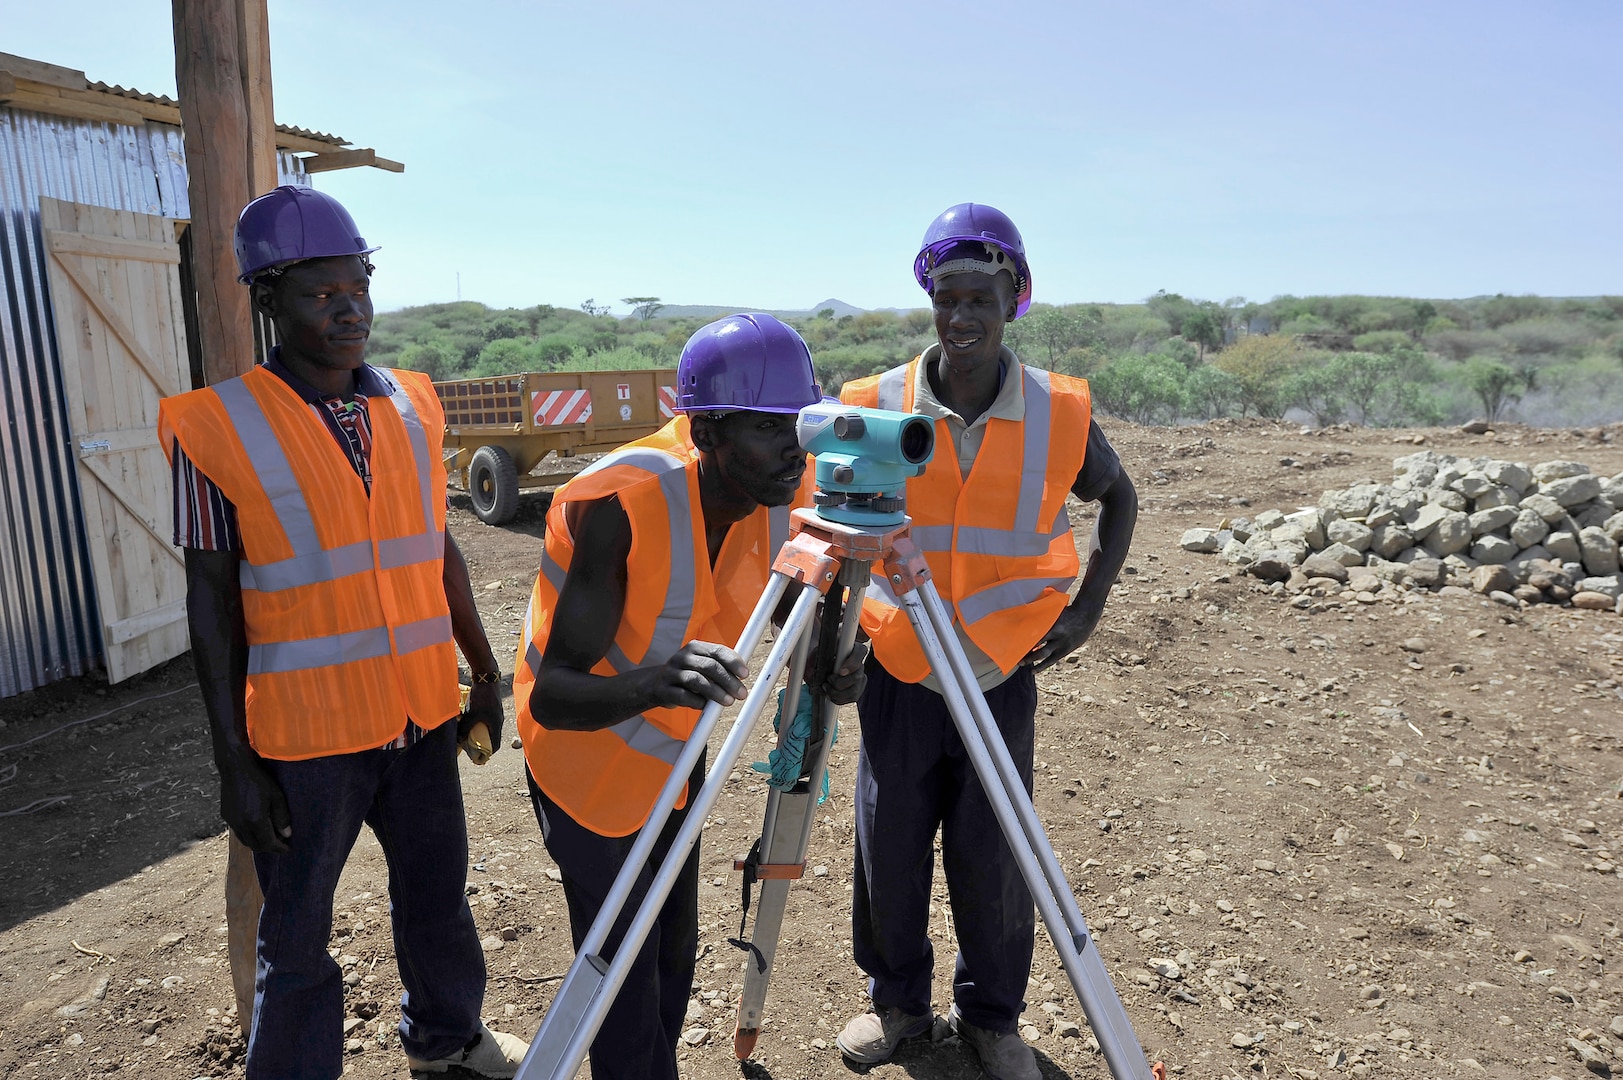 In 2014, water workers survey a biomass site in Kenya as part of the USAID Power Africa initiative.  